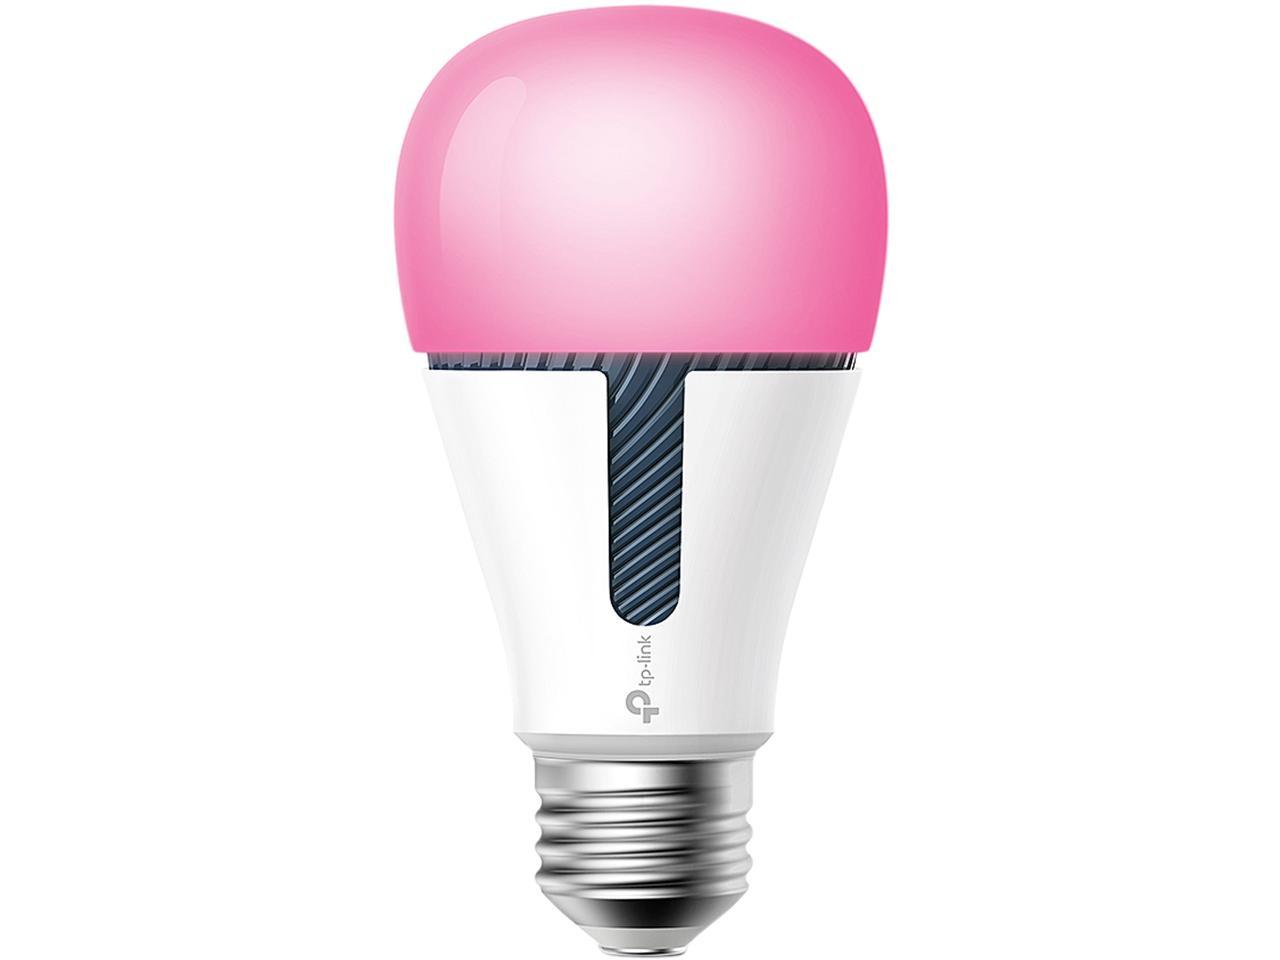 ekspertise Dyrt atom Kasa KL130 Smart Wi-Fi LED Light Bulb by TP-Link - Multicolor, Dimmable,  A19, No Hub Required, Works with Alexa and Google Assistant - Newegg.com